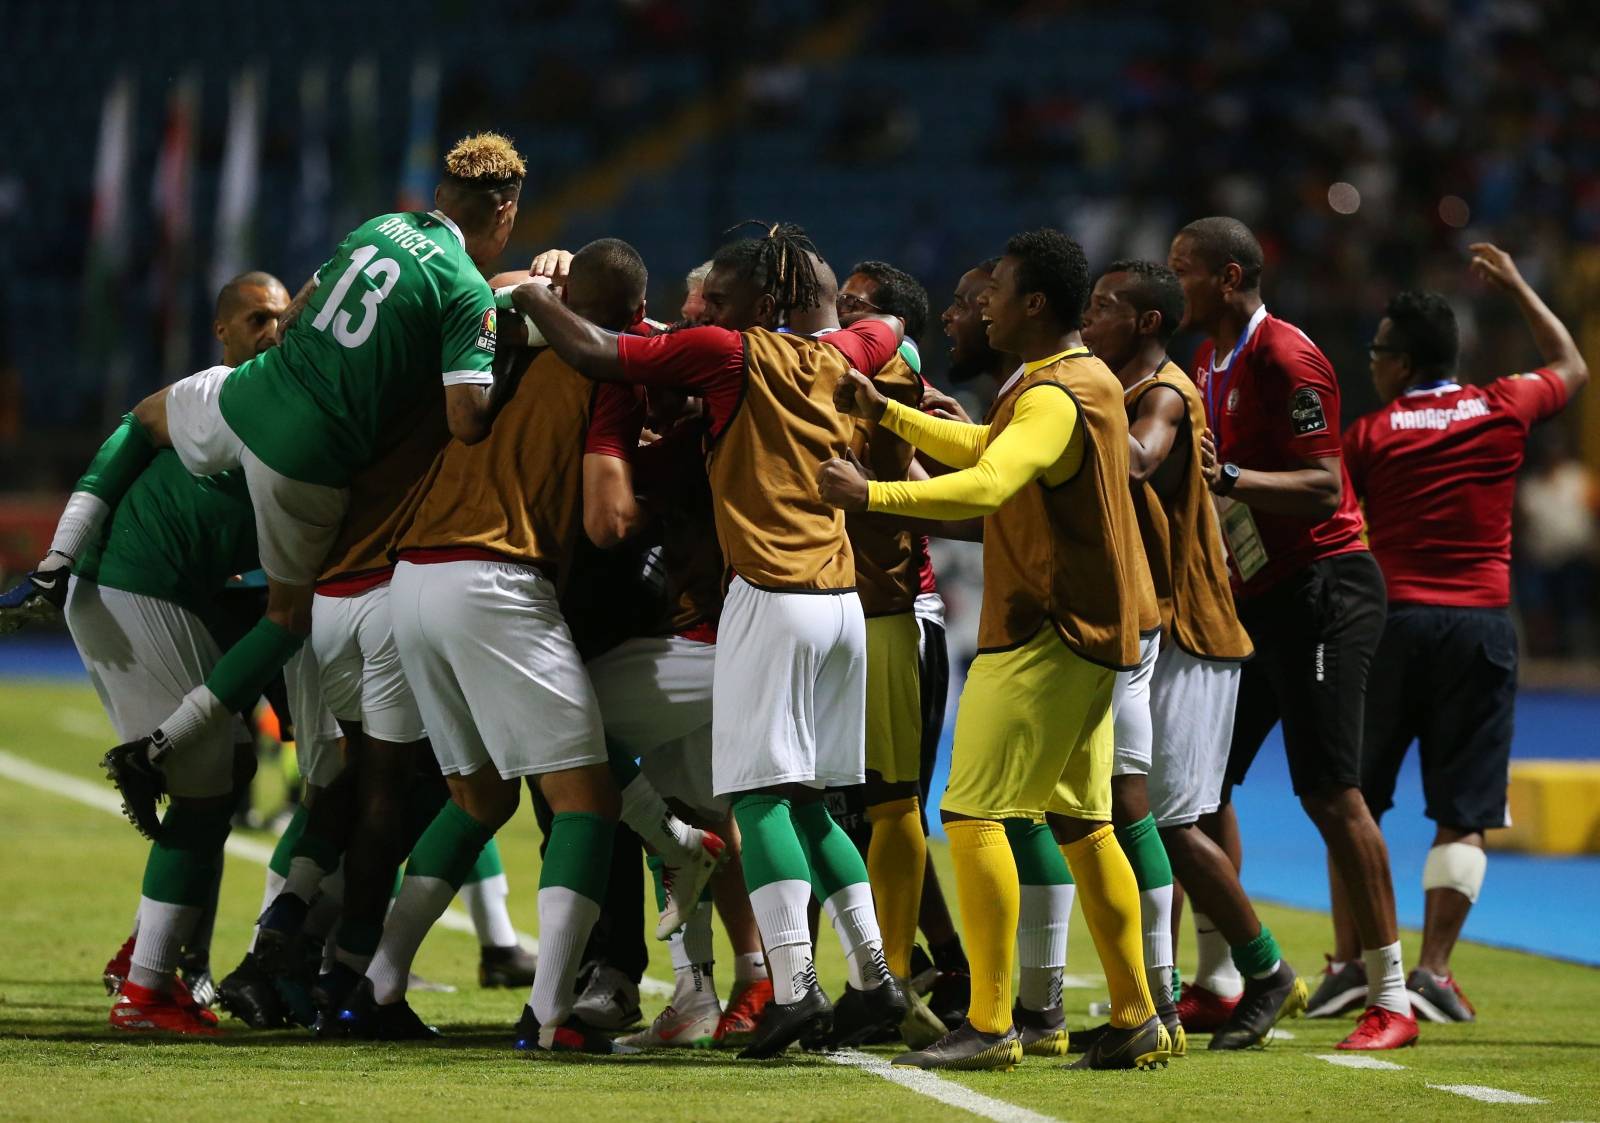 Football - Africa Cup of Nations 2019 Finals - Last 16 - Madagascar v DR Congo - Alexandria - Egypt